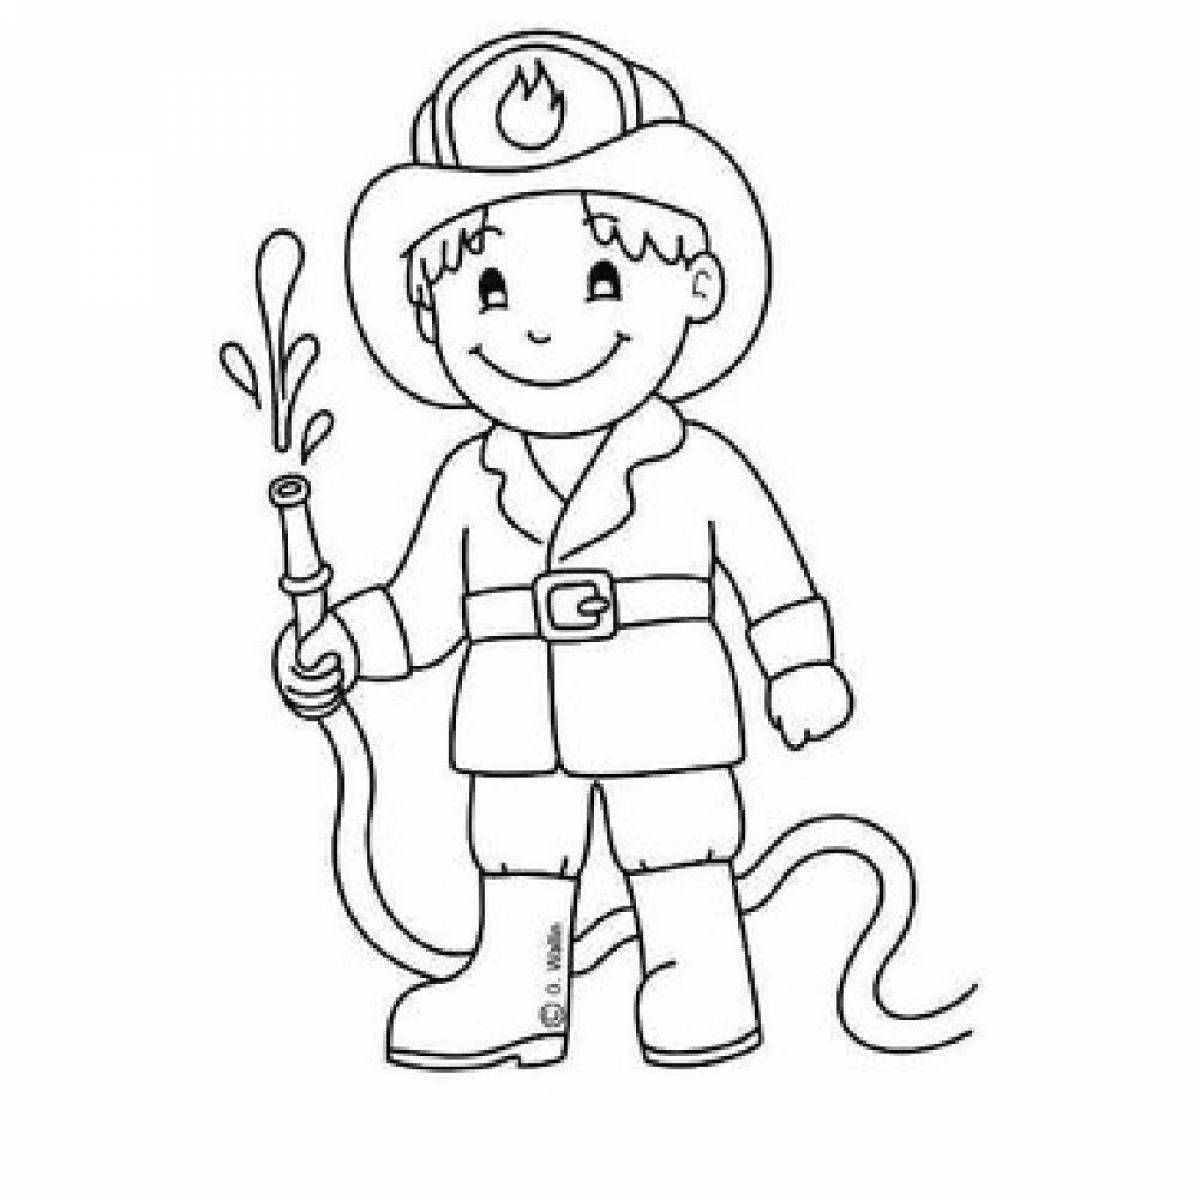 Colorful profession coloring book for children 3-4 years old